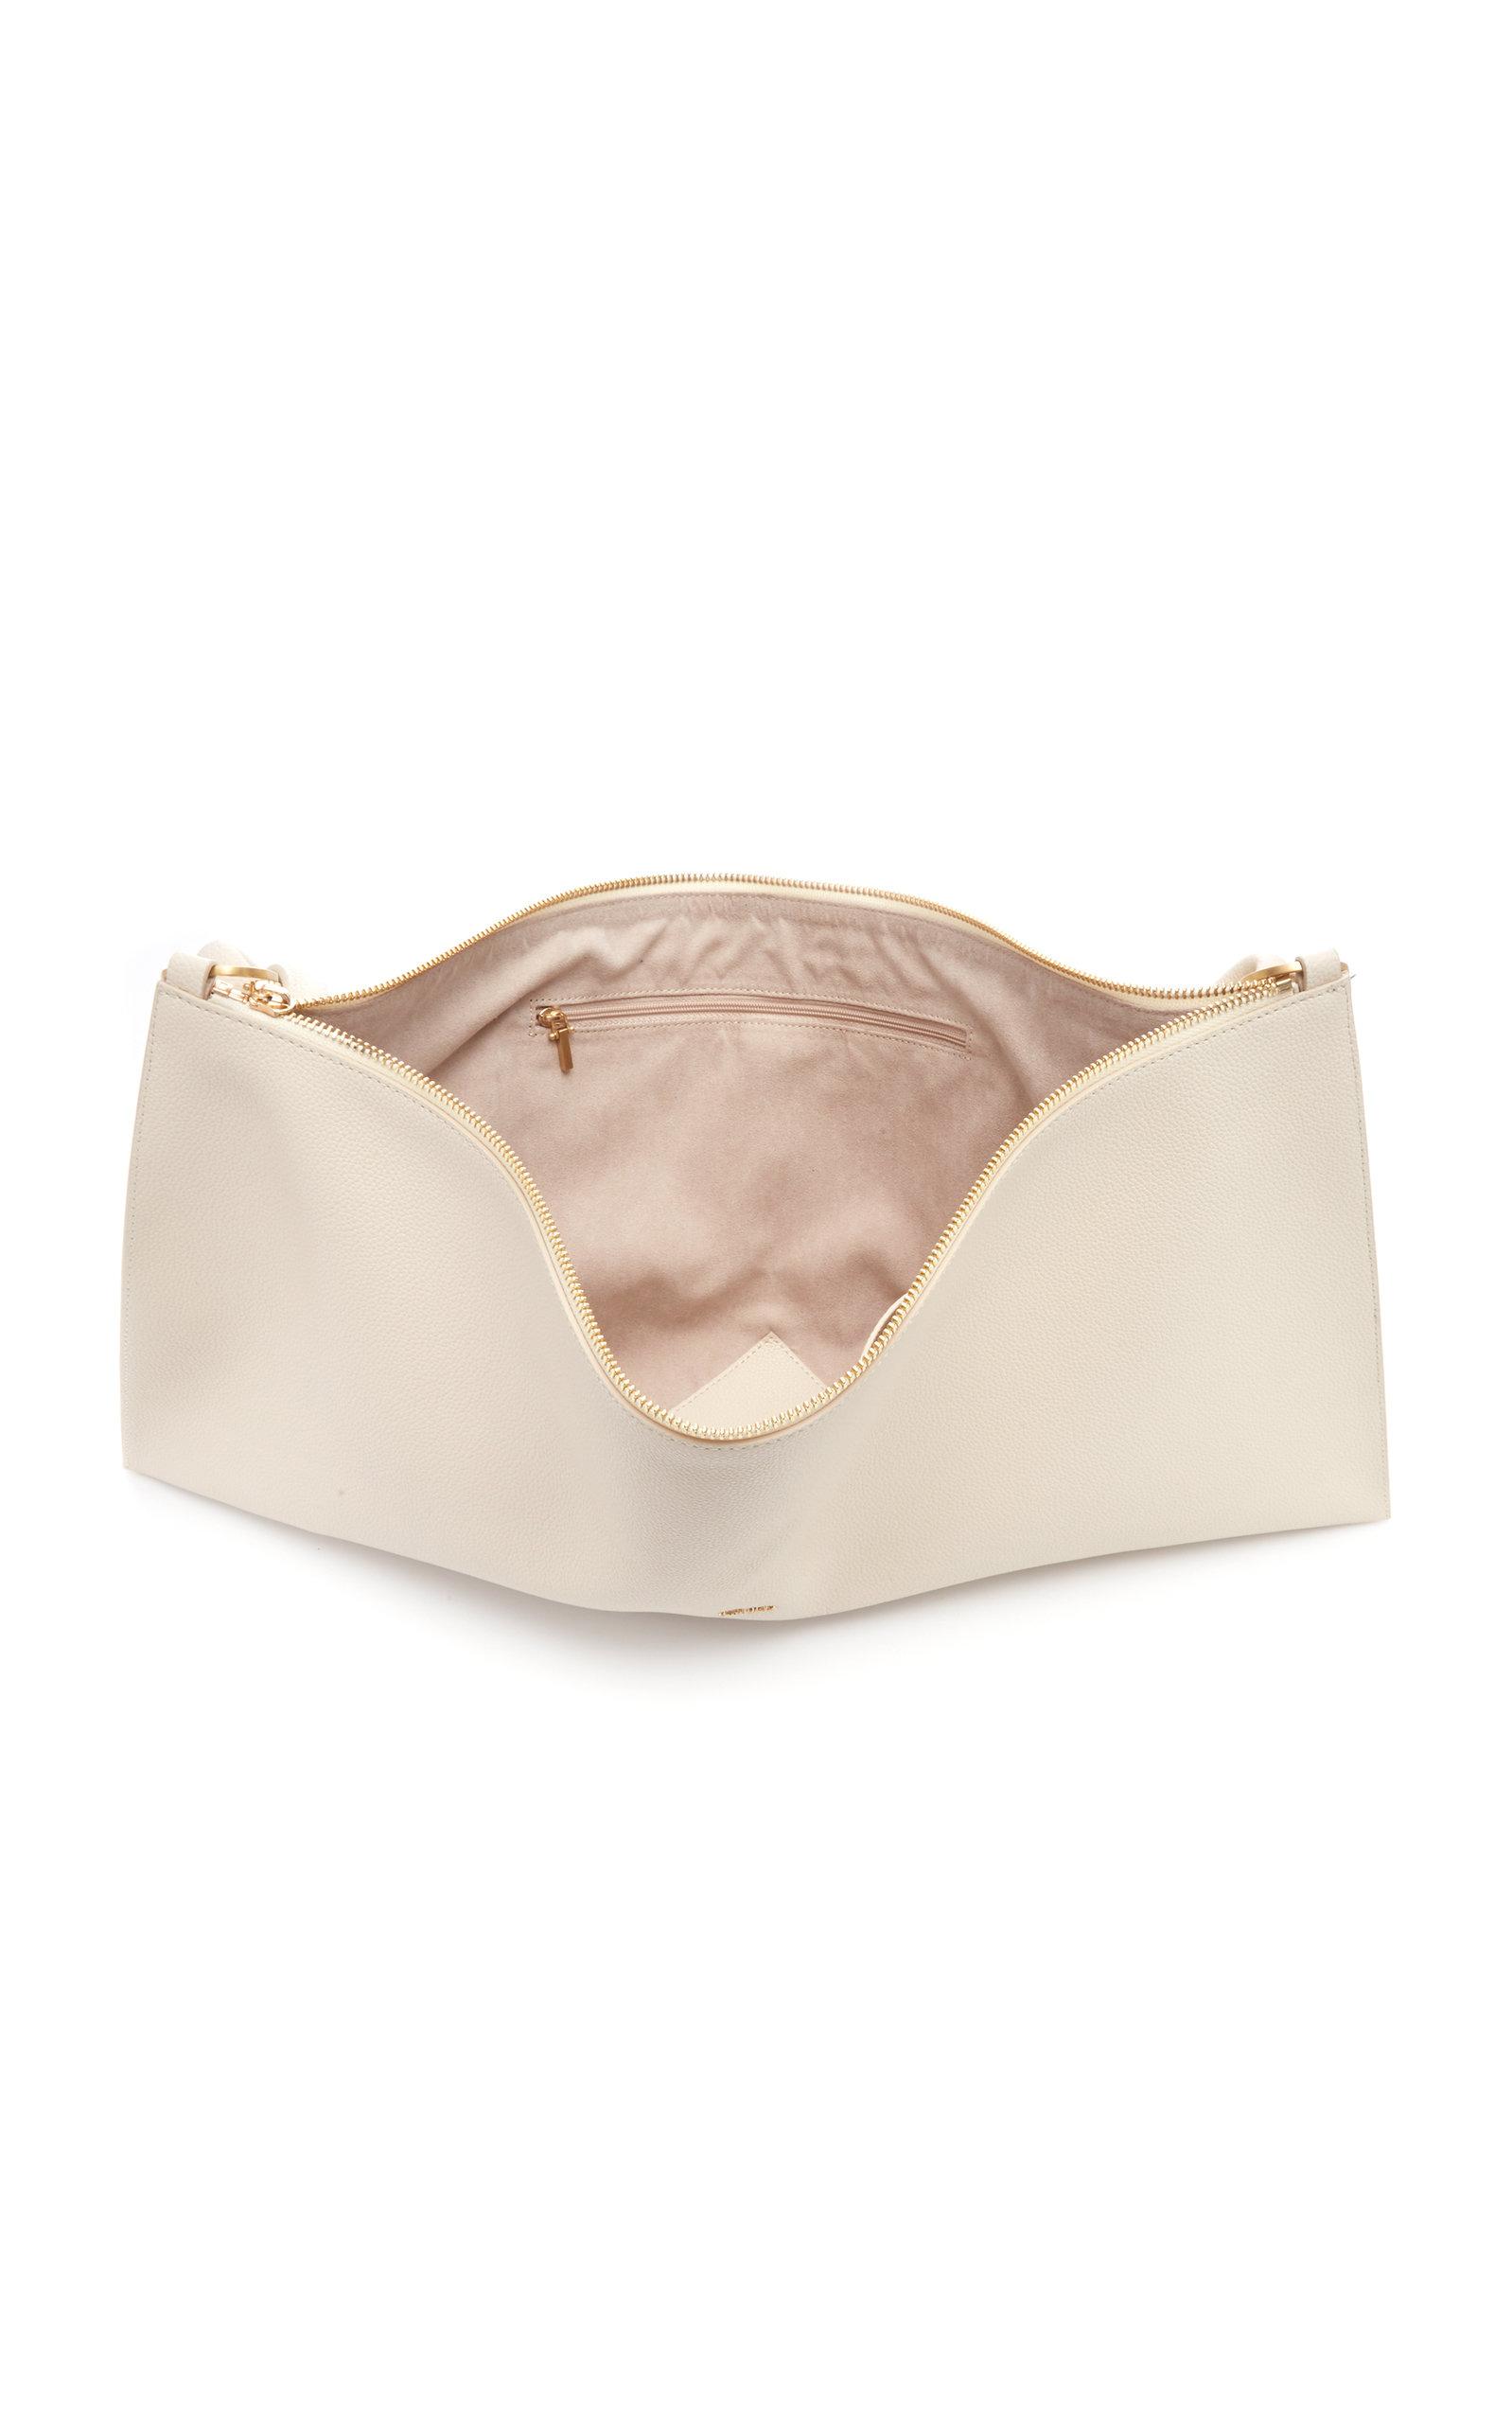 Cult Gaia Hera Oversized Leather Shoulder Bag in White | Lyst